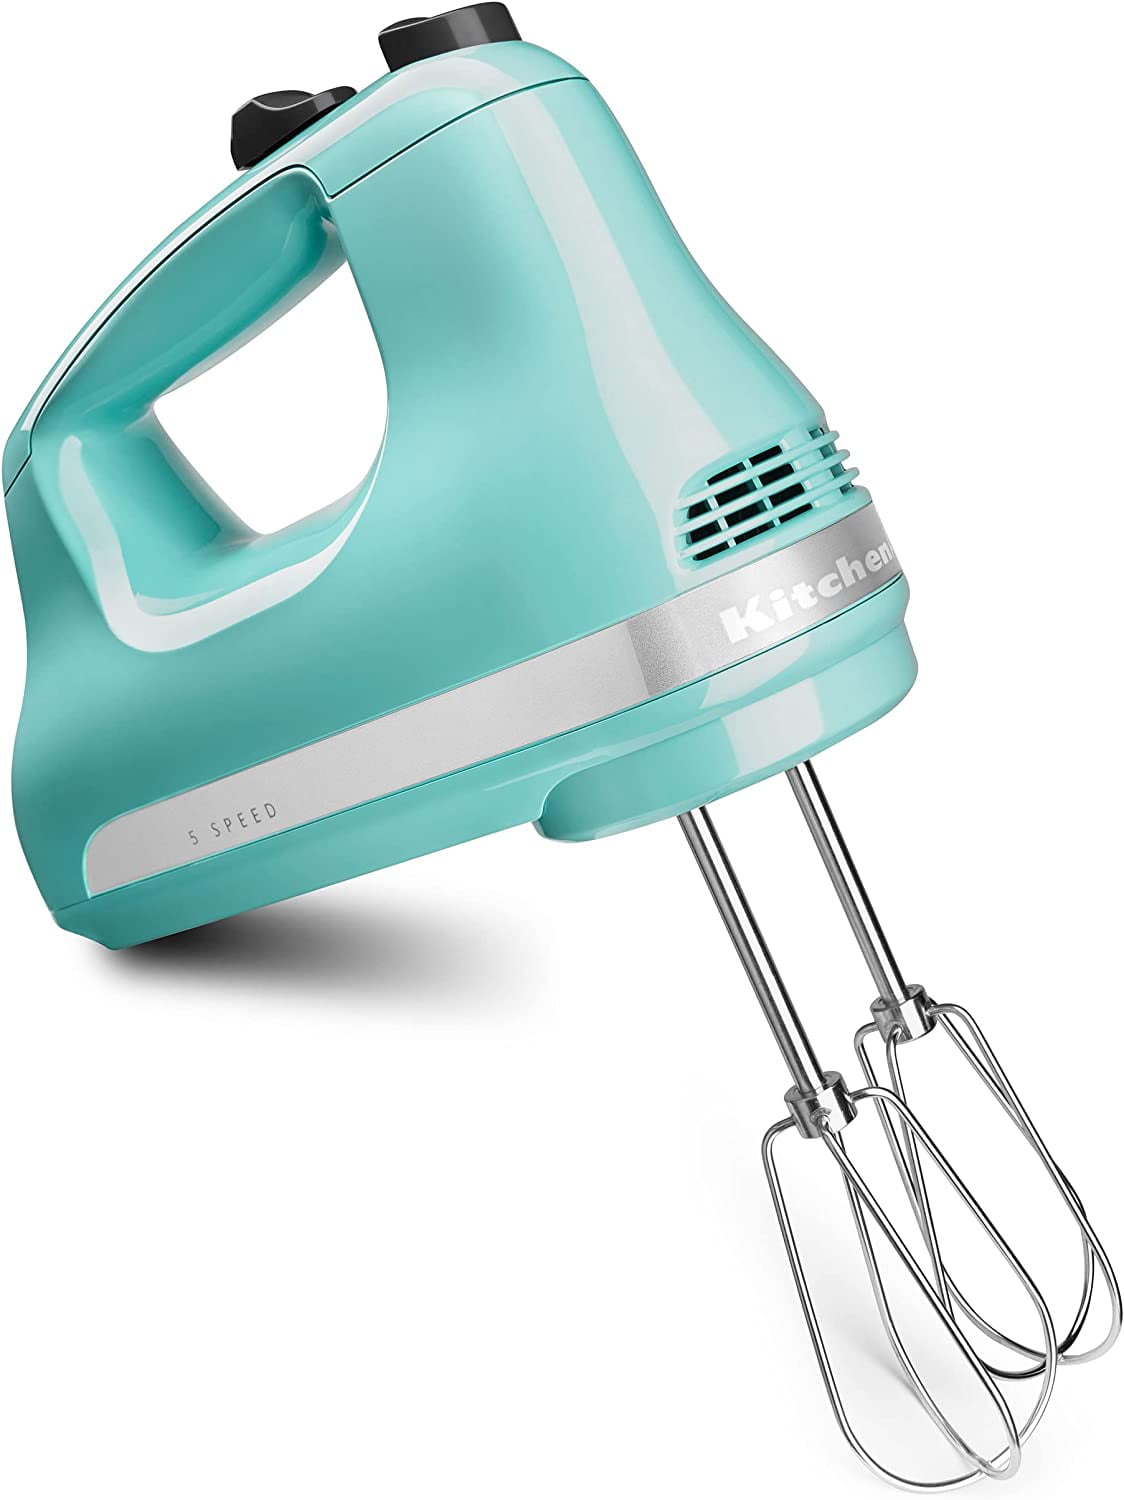 KitchenAid Ultra Power 5-Speed Ice Blue Hand Mixer with 2 Stainless Steel  Beaters KHM512IC - The Home Depot